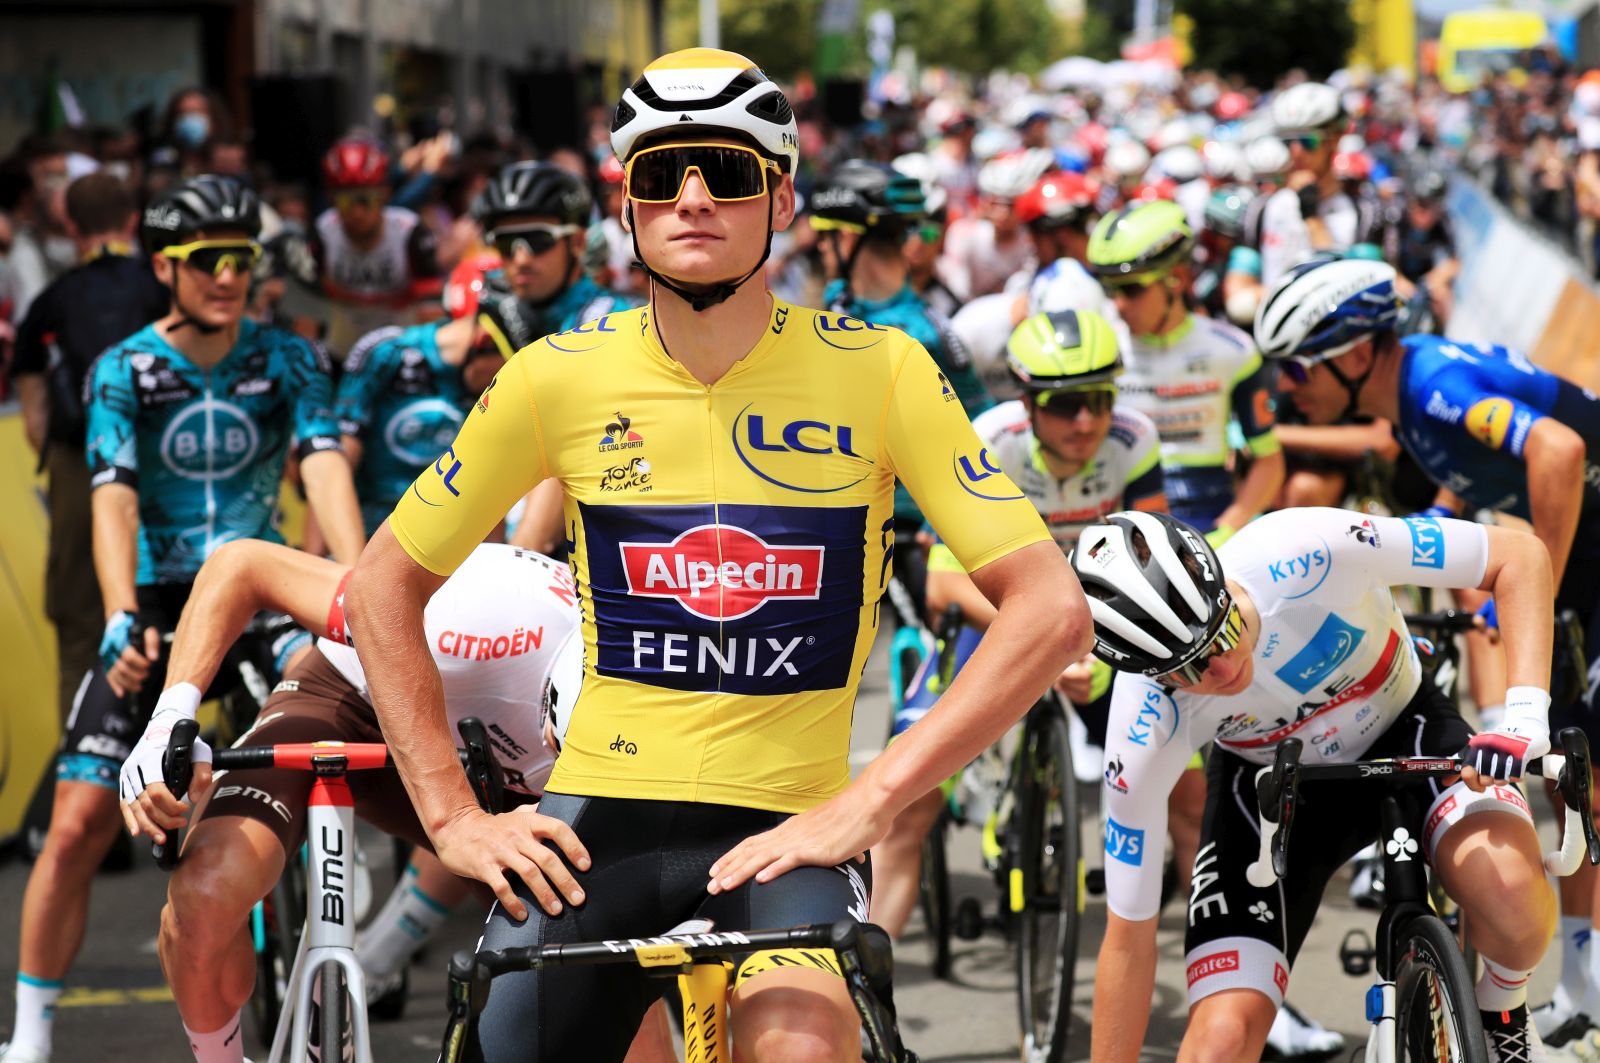 epa09310523 The Yellow Jersey Dutch rider Mathieu Van Der Poel of the Alpecin-Fenix team waits at the start of the 4th stage of the Tour de France 2021 over 150.4 km from Redon to Fougeres, France, 29 June 2021.  EPA/CHRISTOPHE PETIT-TESSON